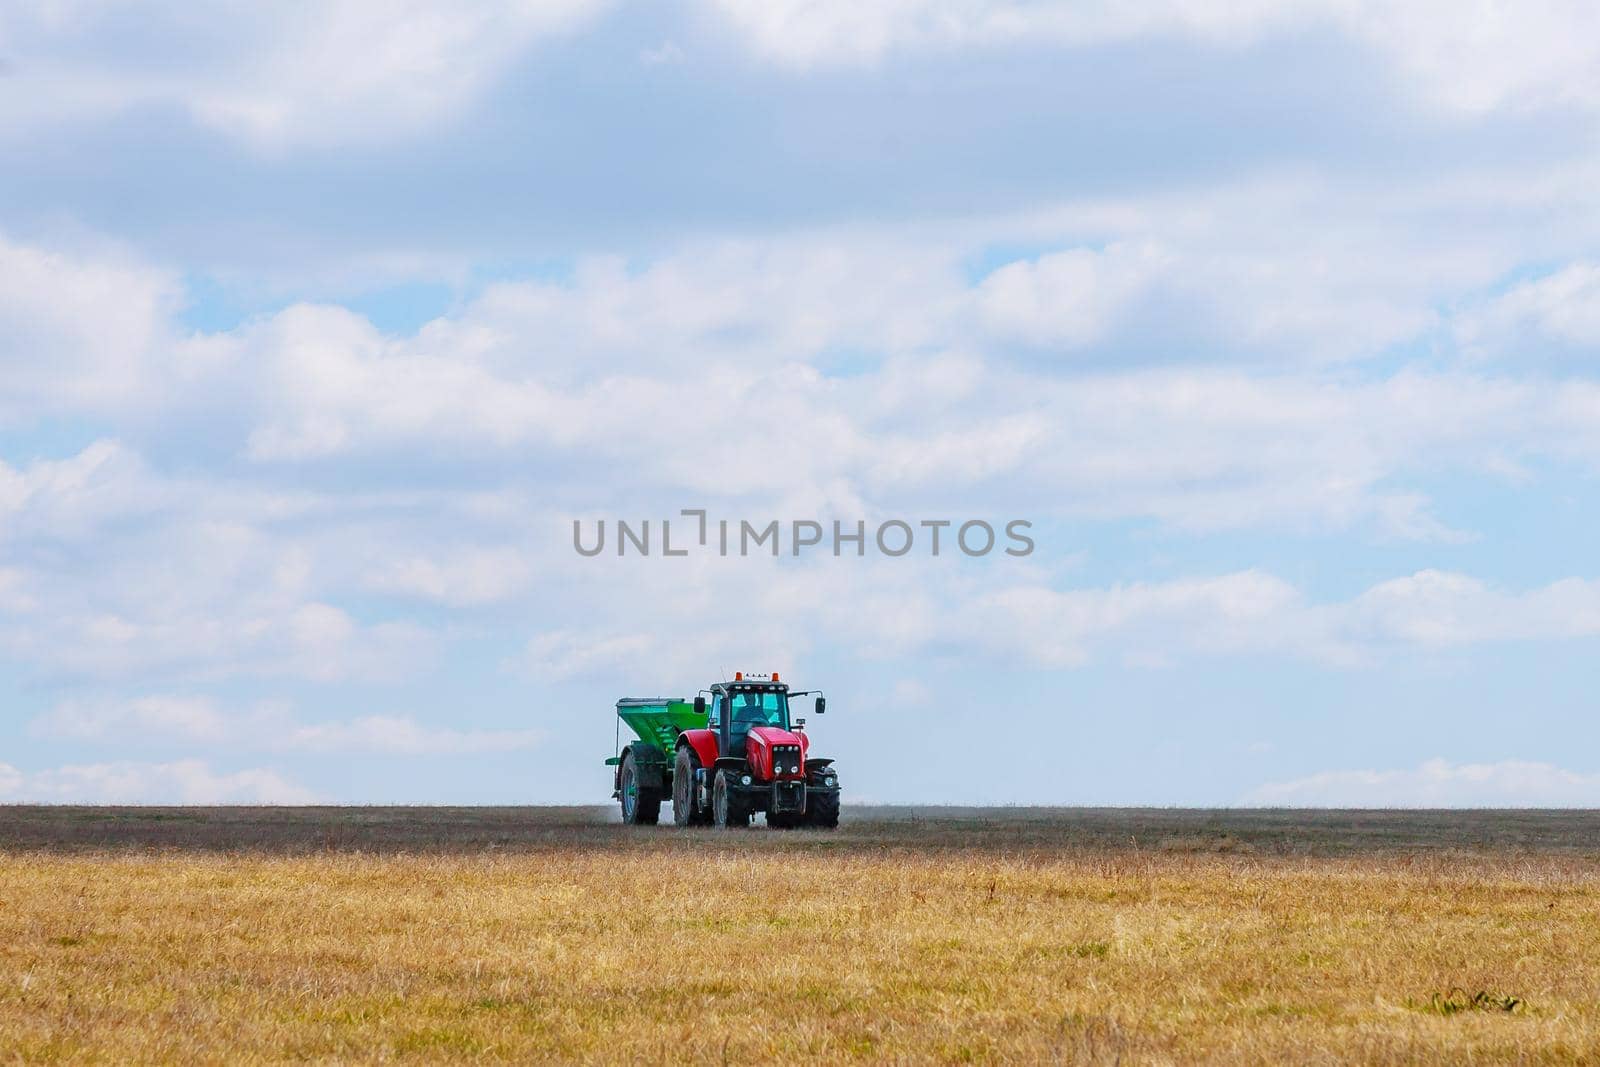 A red tractor in a green trailer is carrying fertilizer to the field. Agricultural work is performed by a farmer.